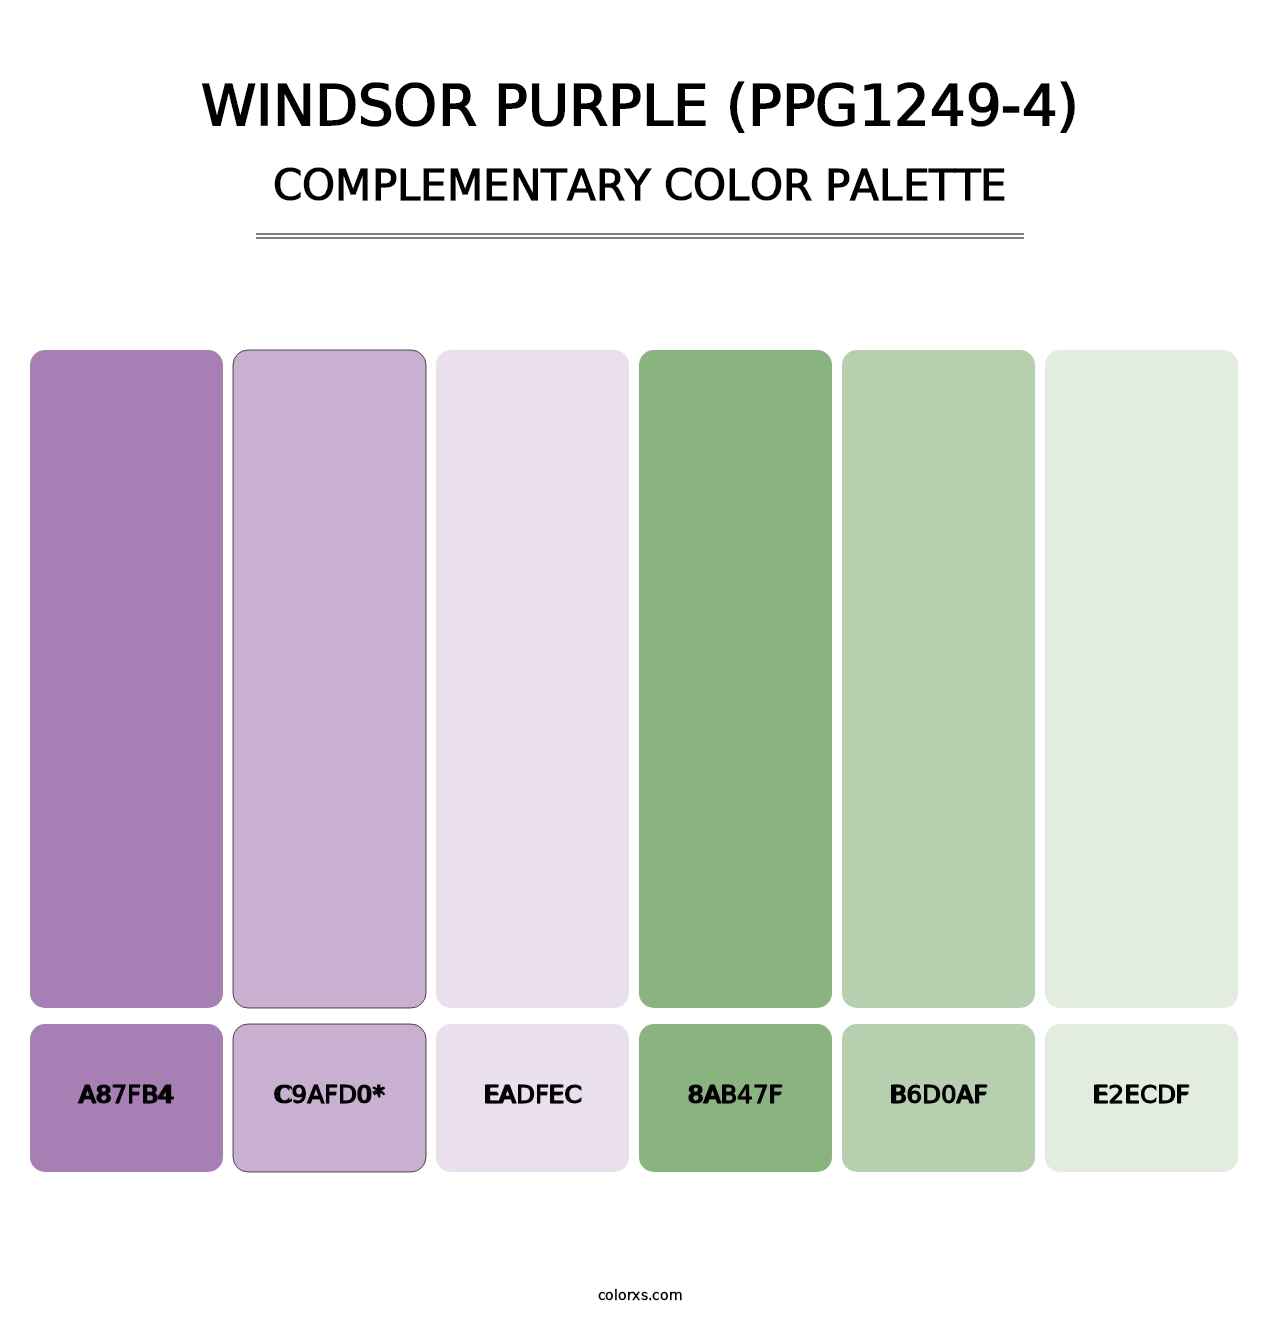 Windsor Purple (PPG1249-4) - Complementary Color Palette